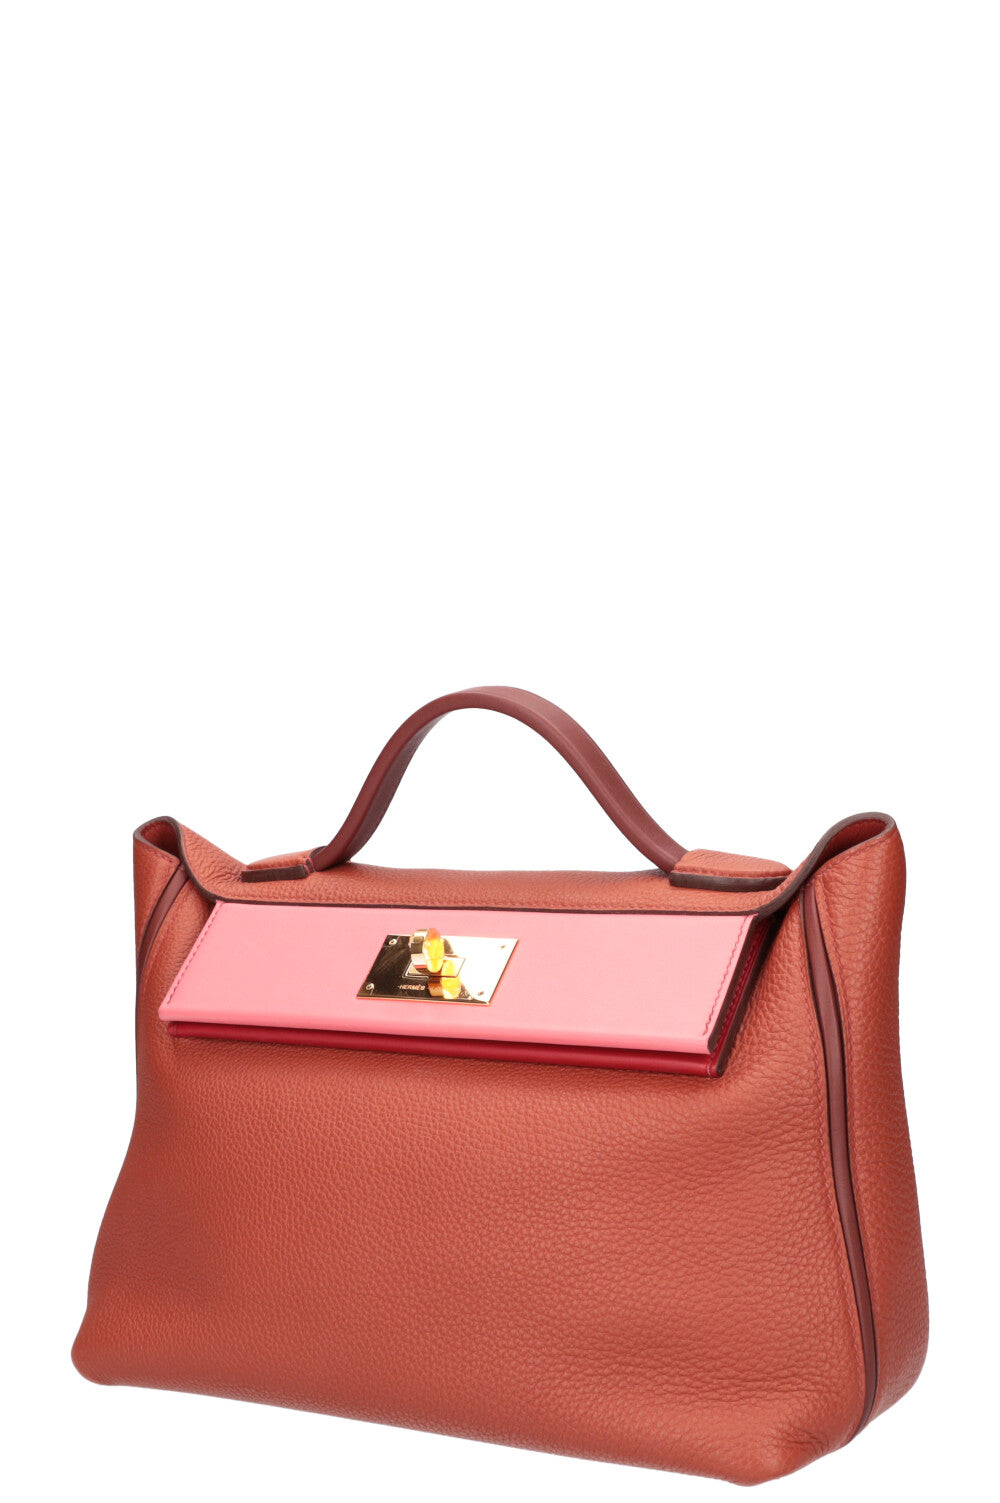 Hermes 24/24 Bag Togo with Swift 29 Red